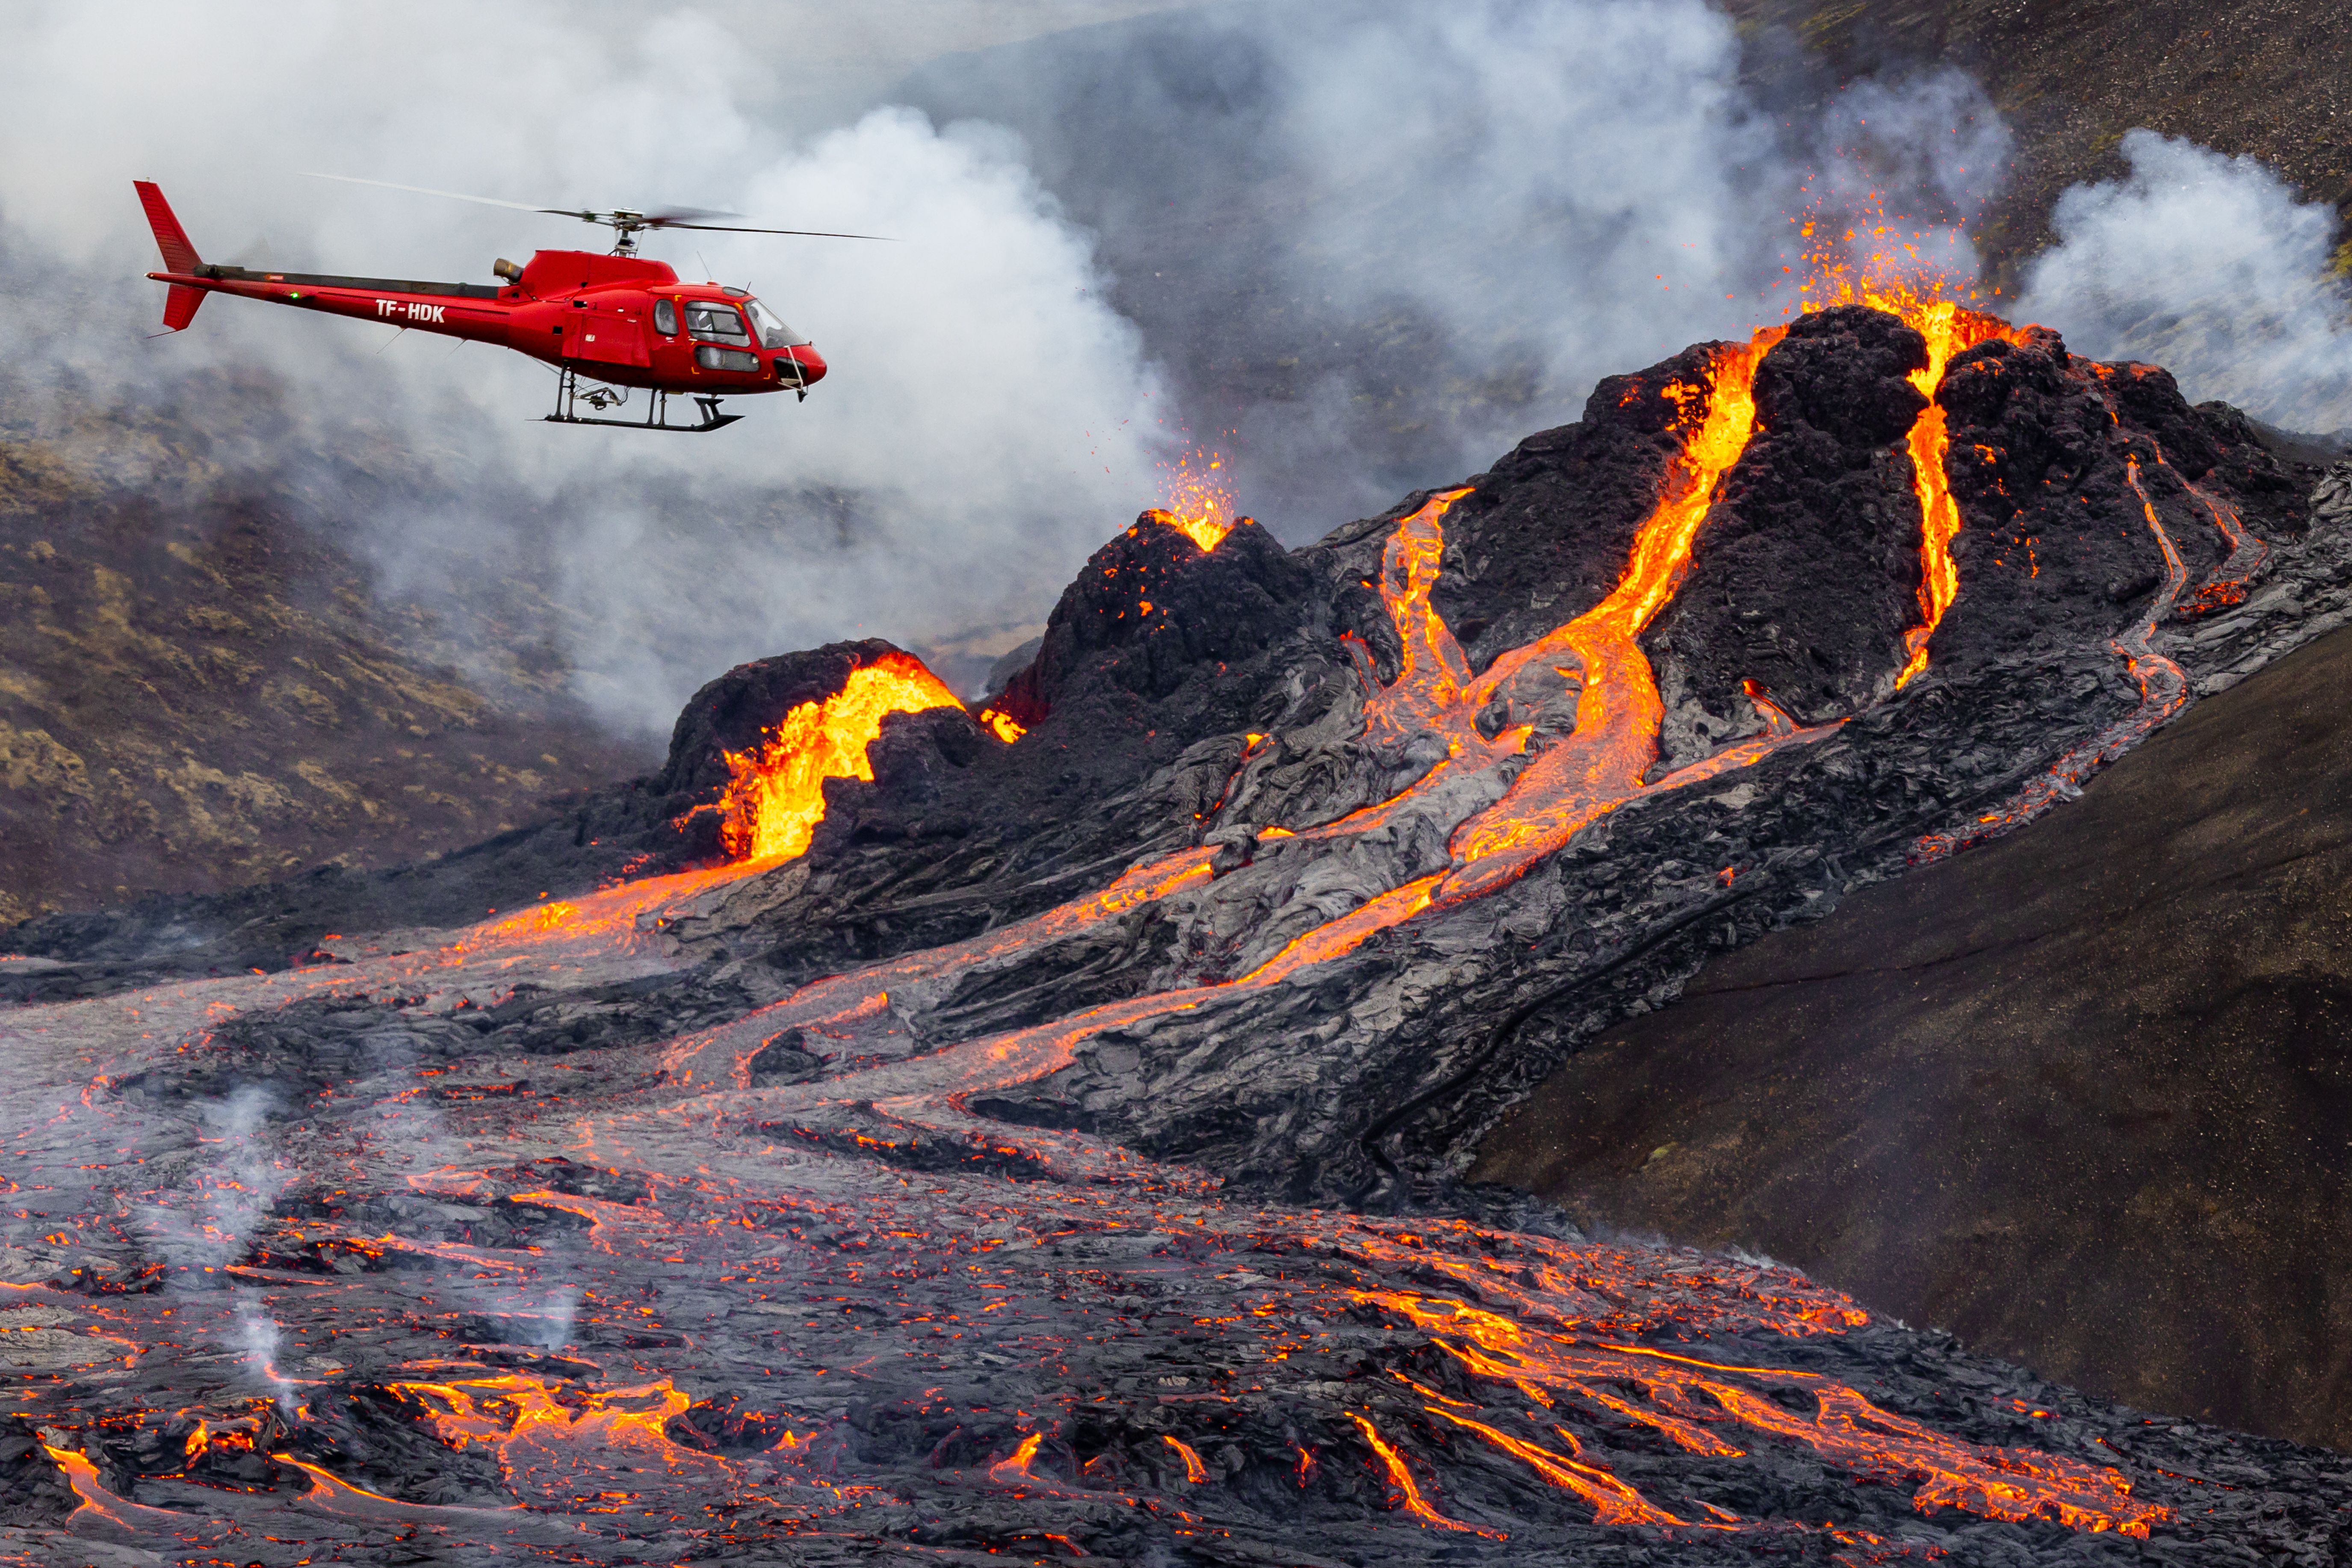 A helicopter flying near the lava flow on March 20.